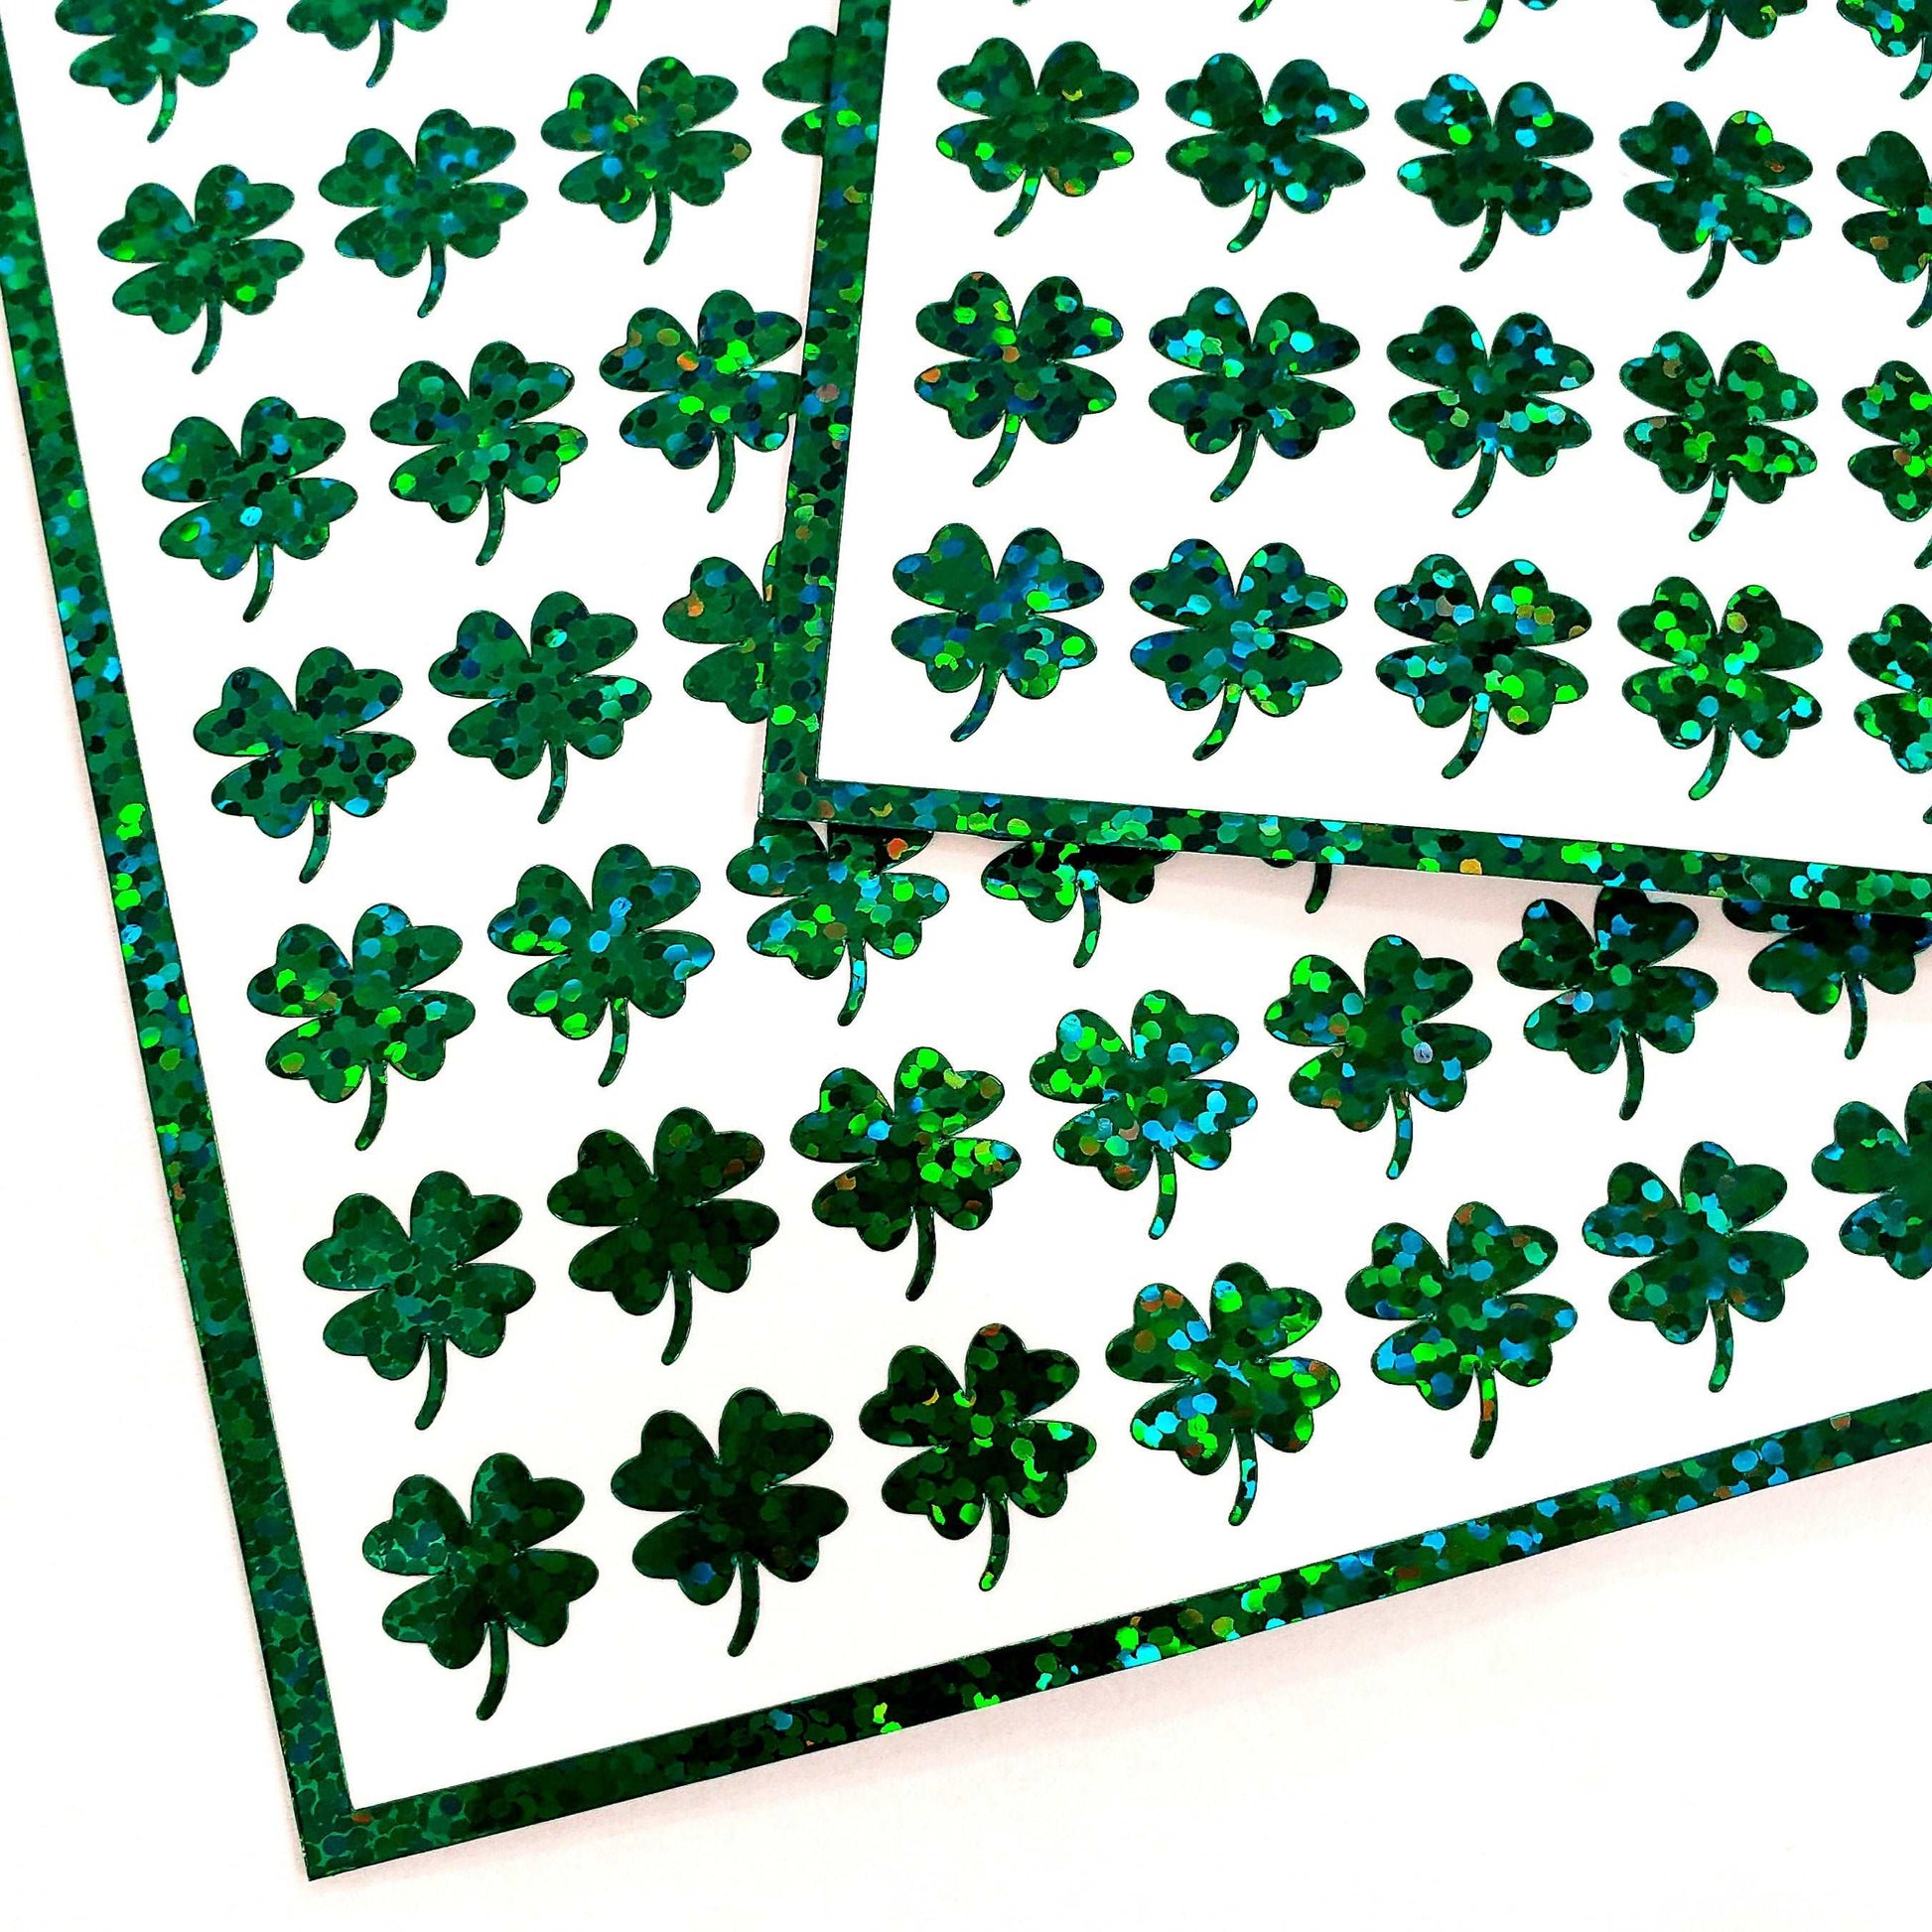 St. Patrick's Day Lucky Clover Stickers, set of 104.